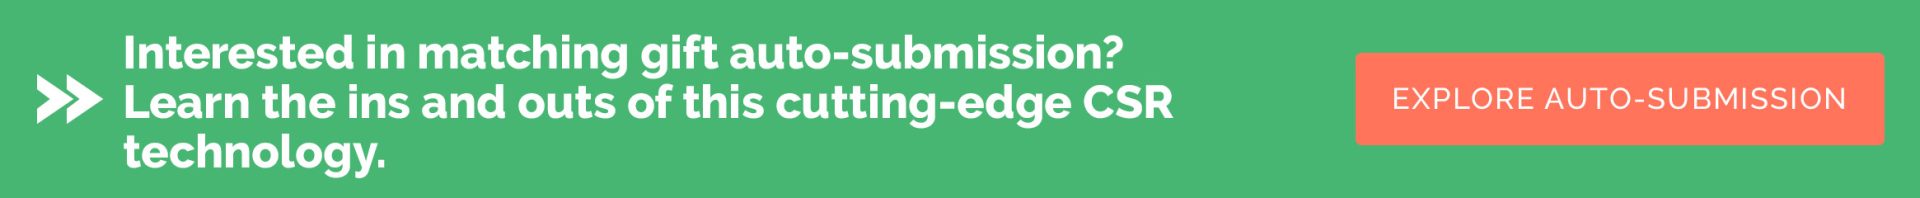 Interested in matching gift auto-submission? Learn the ins and outs of this cutting edge CSR technology. Explore auto-submission.